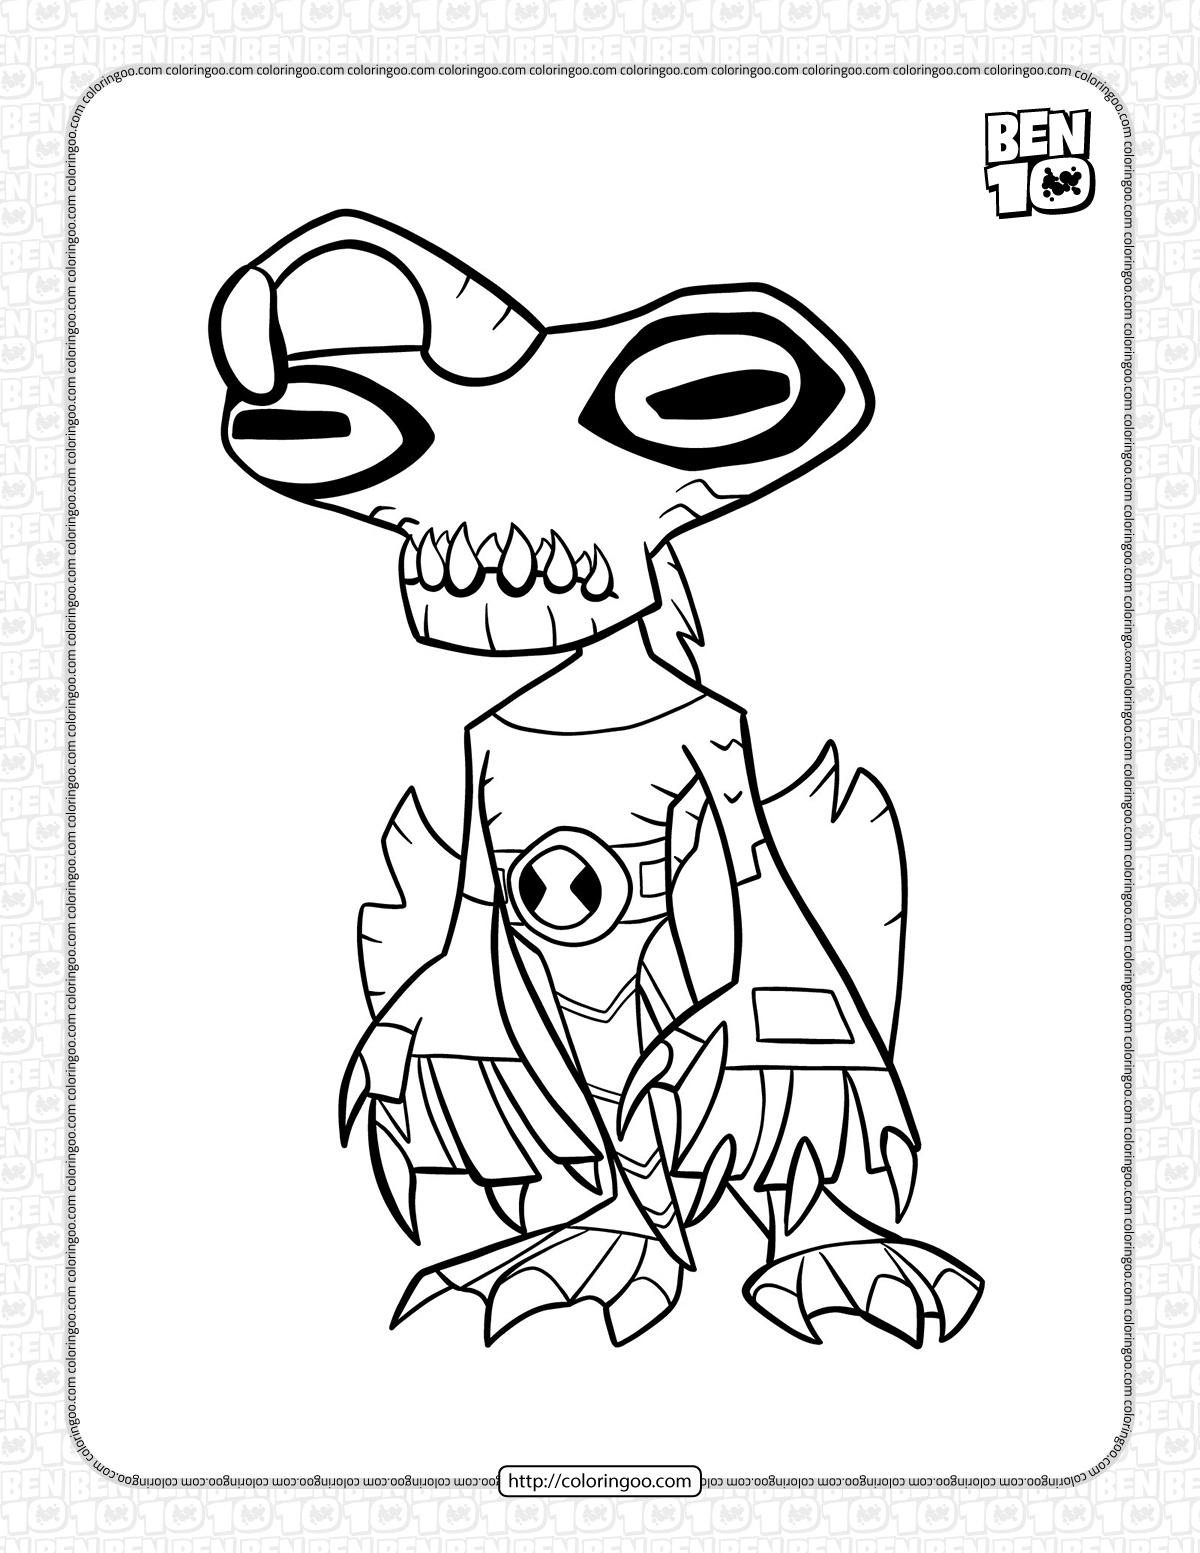 grey jaws biomnitrix coloring pages